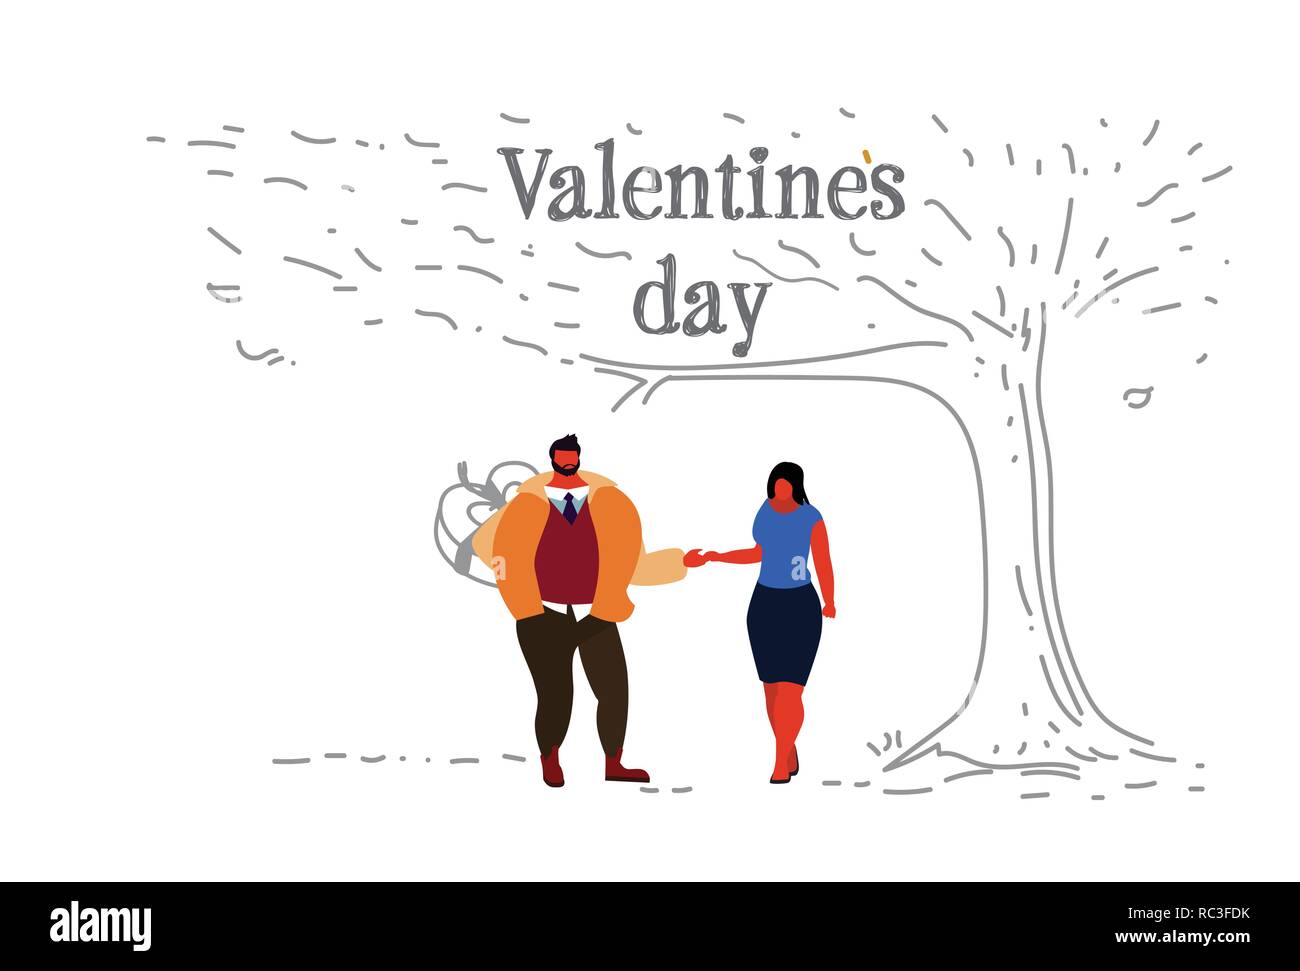 How to draw love tree with boyfriend and girlfriend